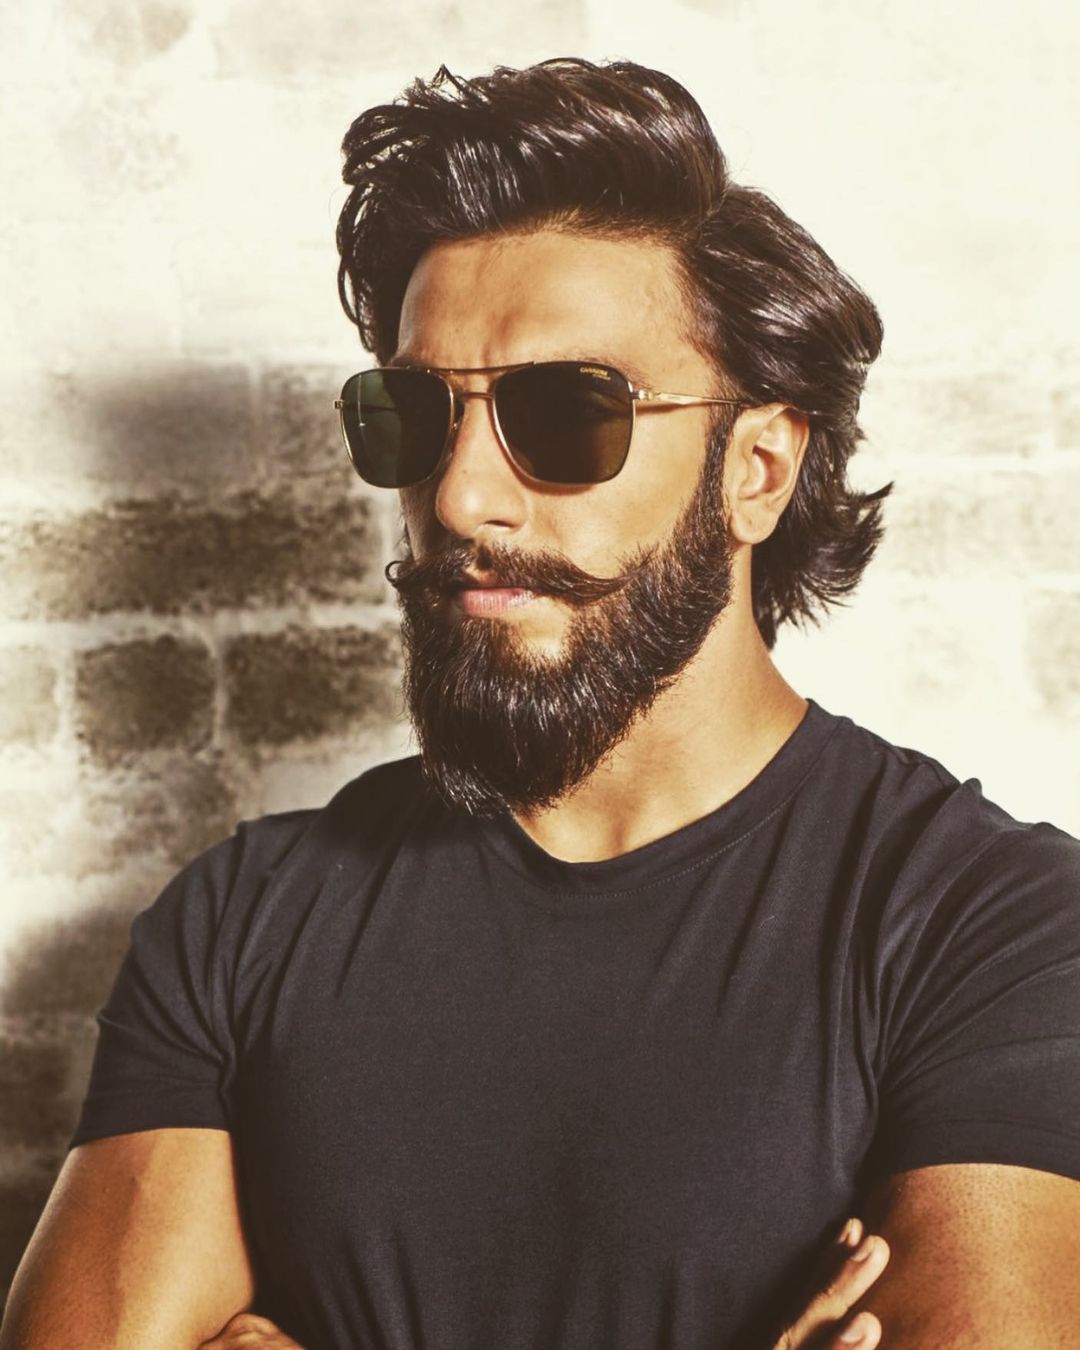 Amazing: Ranveer Singh All Geared Up To Shoot For Don 3 And Baiju Bawra  After Singham